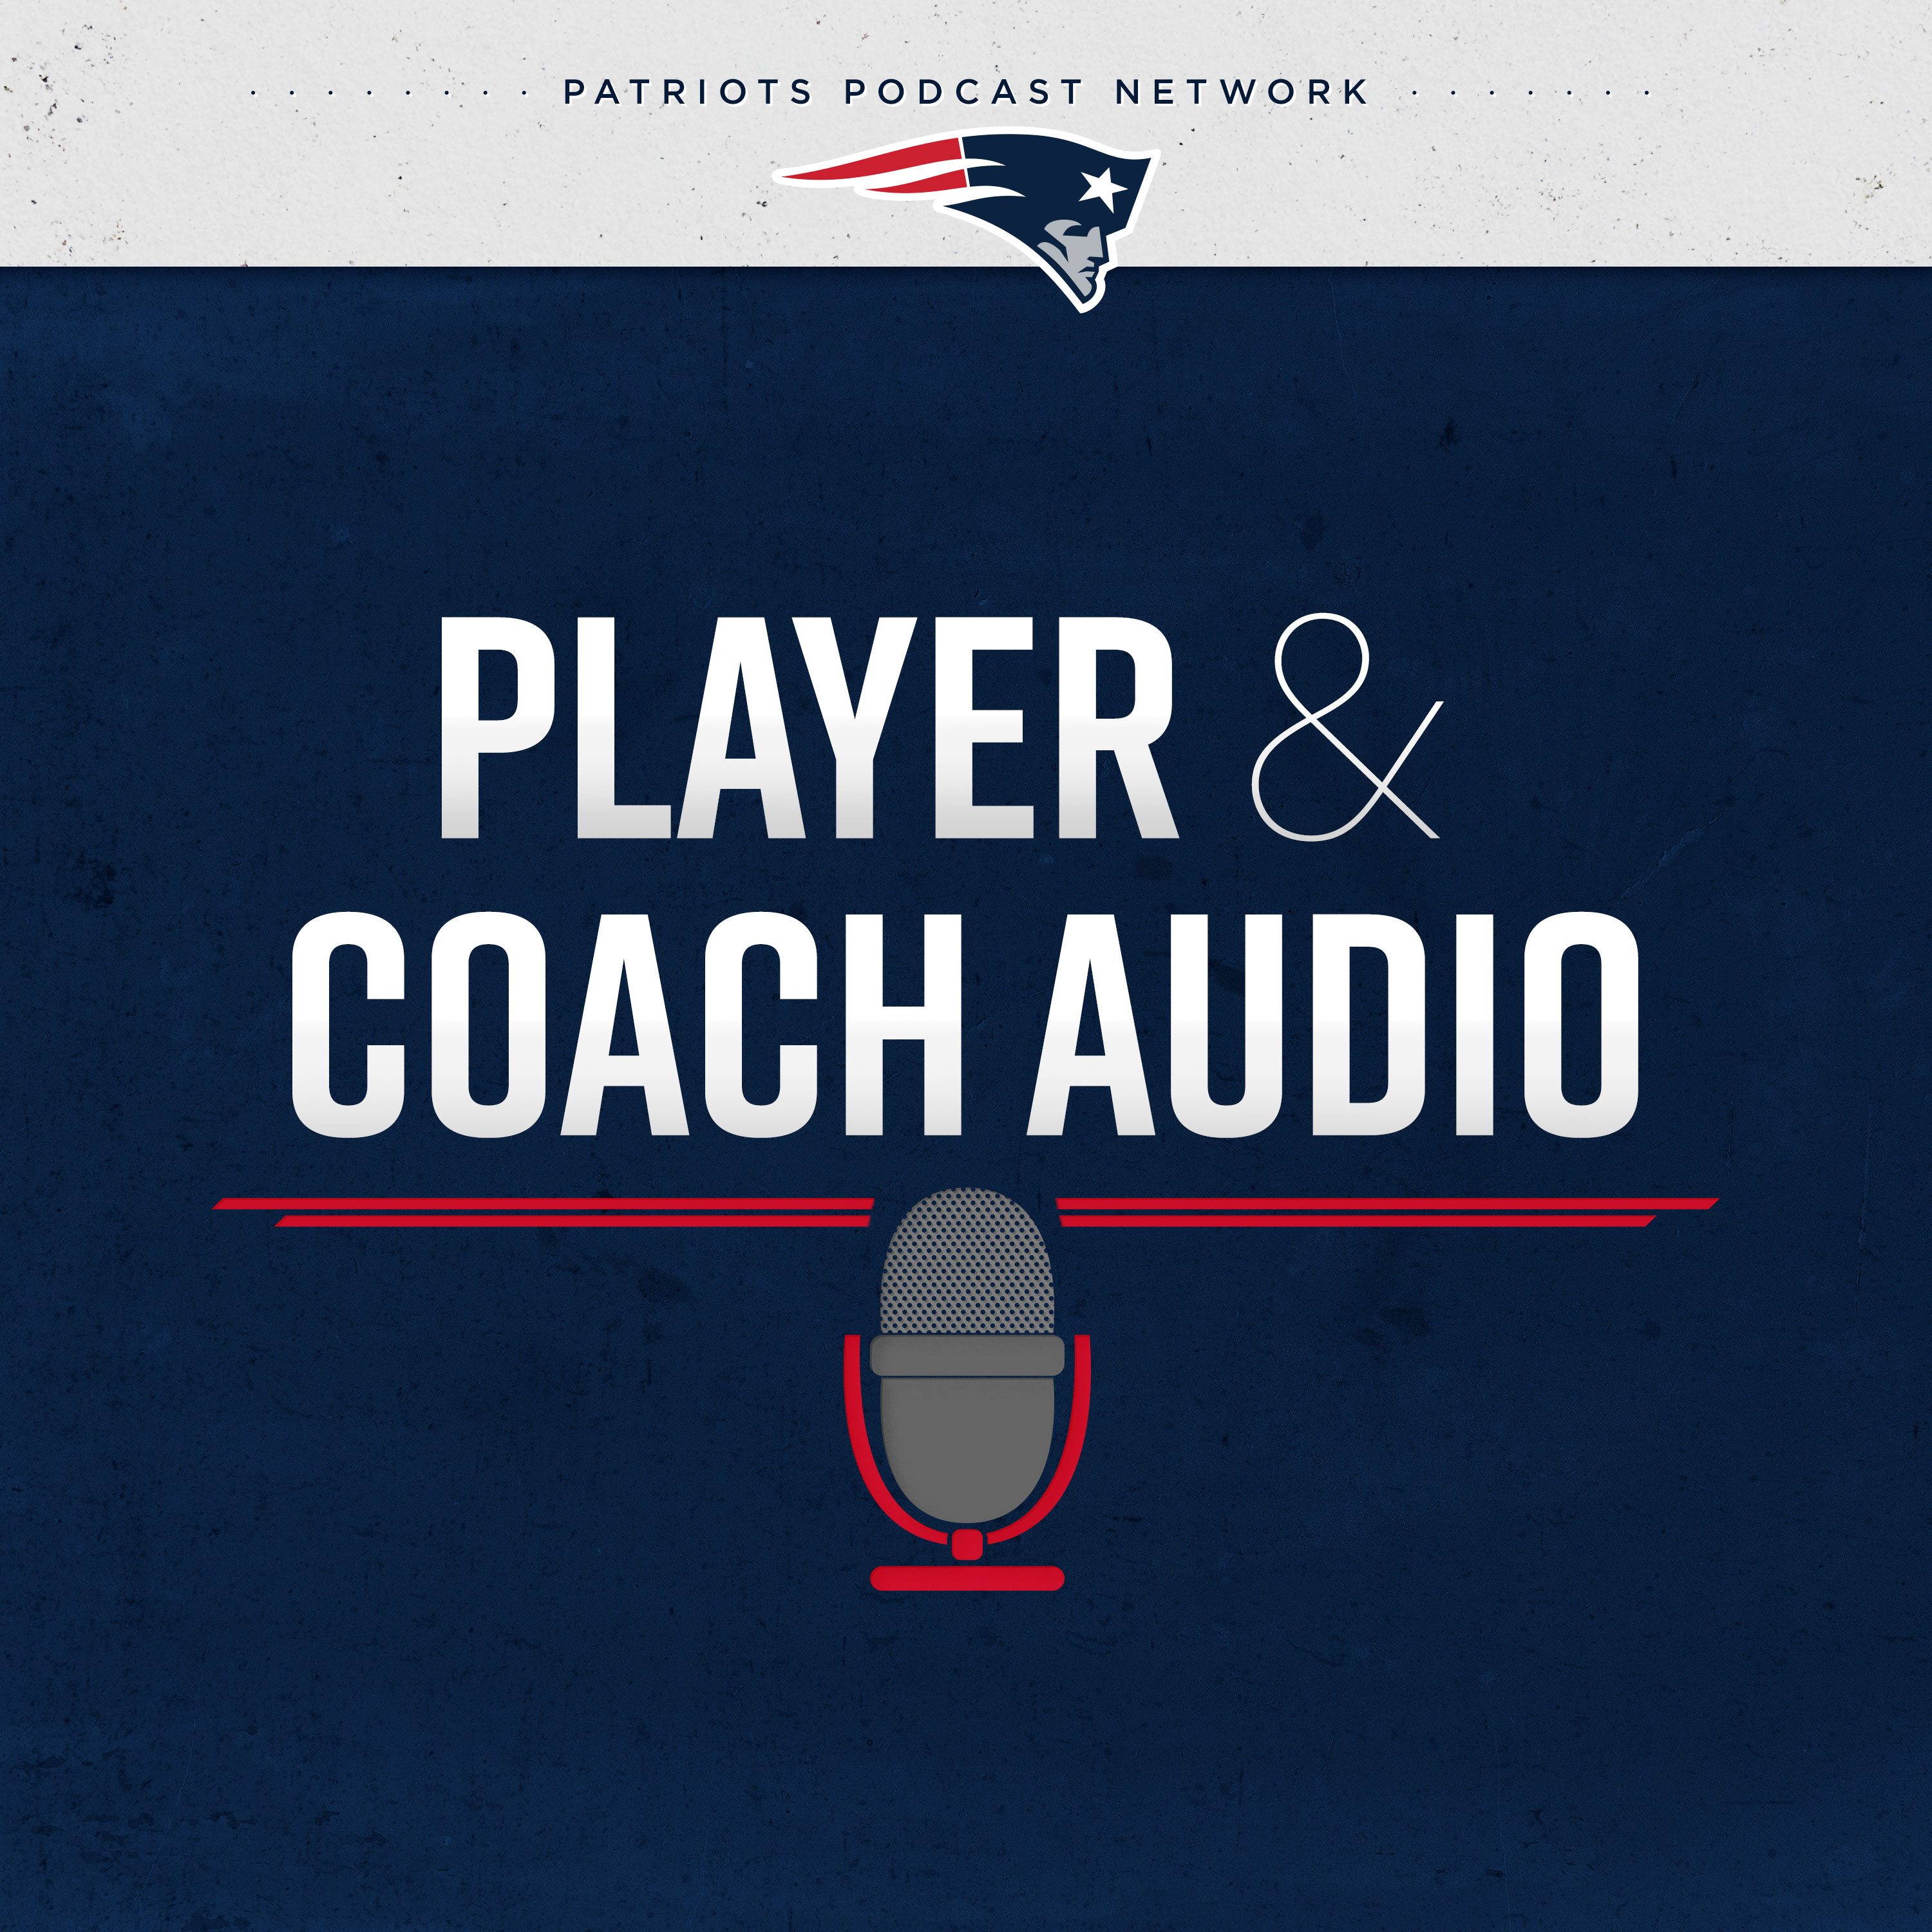 Matthew Slater 3/17: "I think the culture we've created here is bigger than any one person"